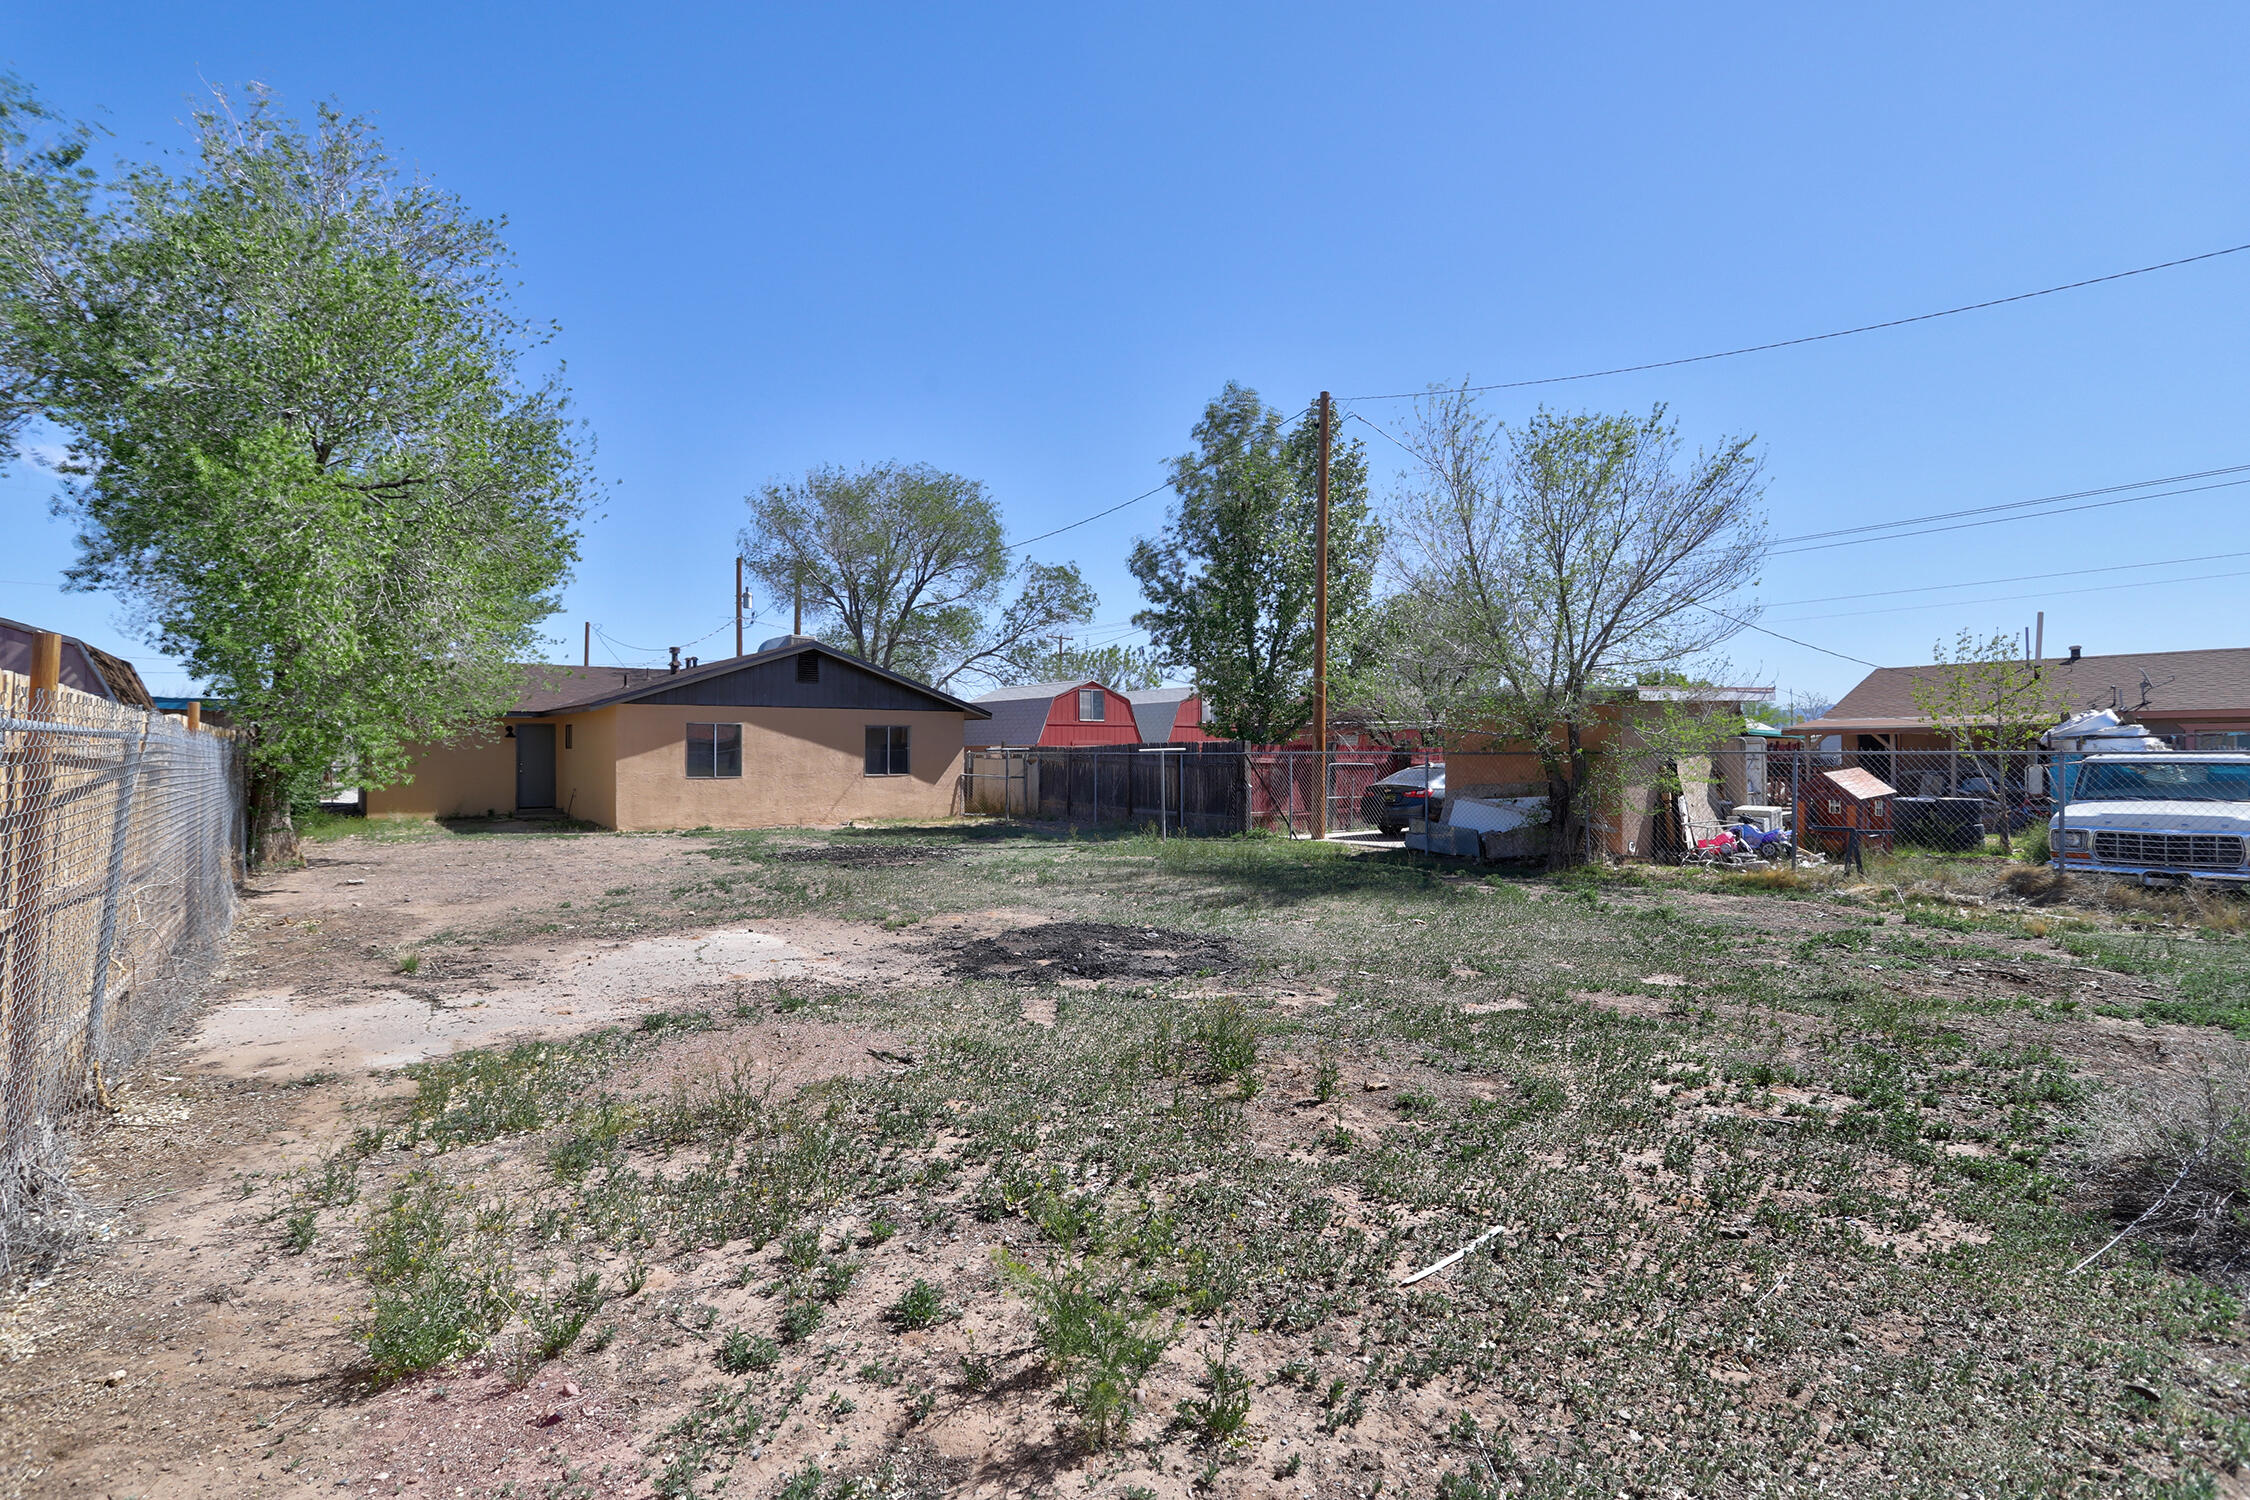 1013 W Picard Avenue, Belen, New Mexico 87002, 3 Bedrooms Bedrooms, ,1 BathroomBathrooms,Residential,For Sale,1013 W Picard Avenue,1061028